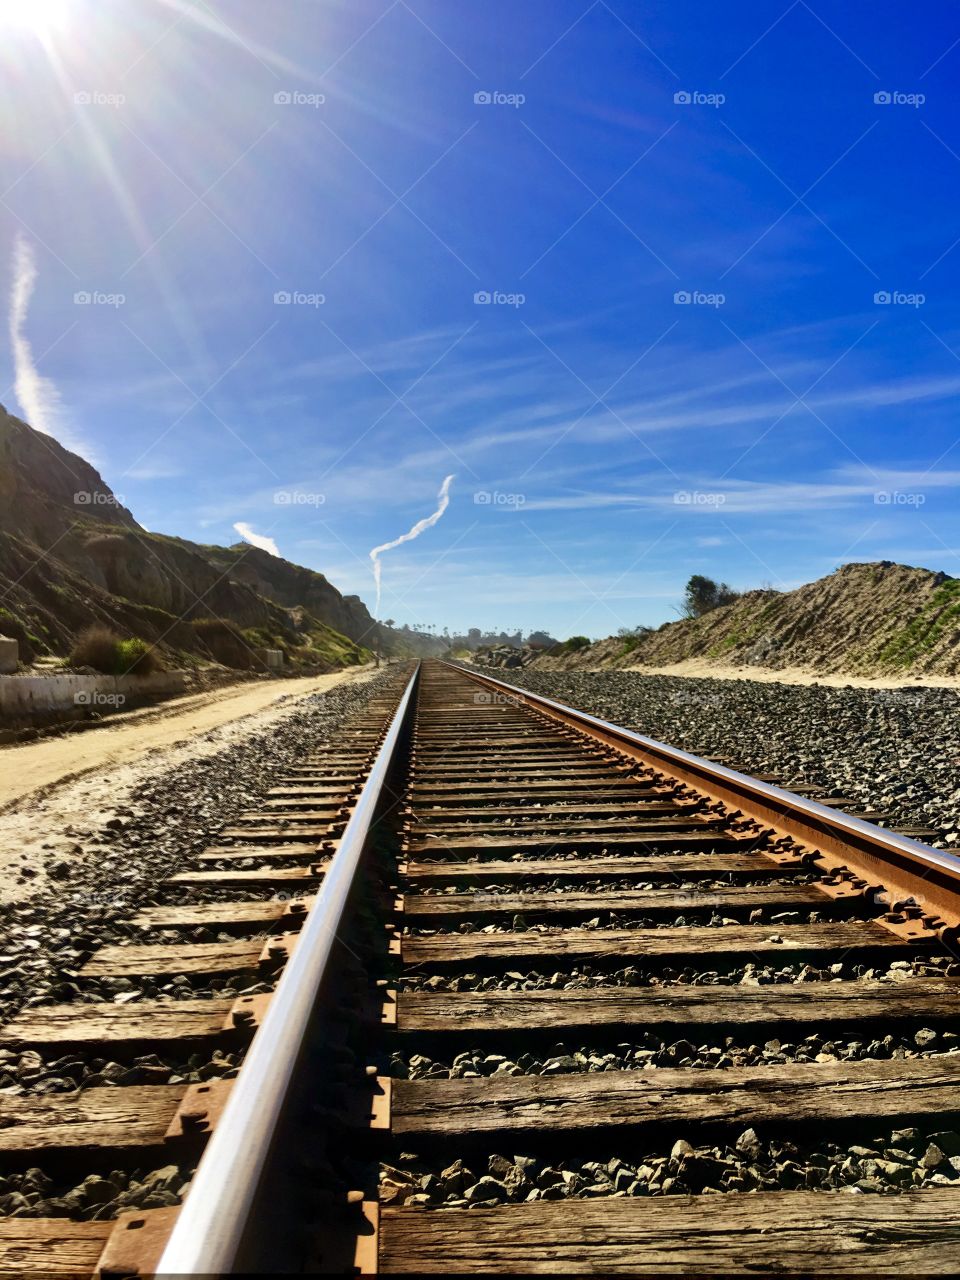 Foap Mission Perspective Matters! Railroad Tracks From A Low Perspective With Blue Sky’s, Clouds And Hillsides !